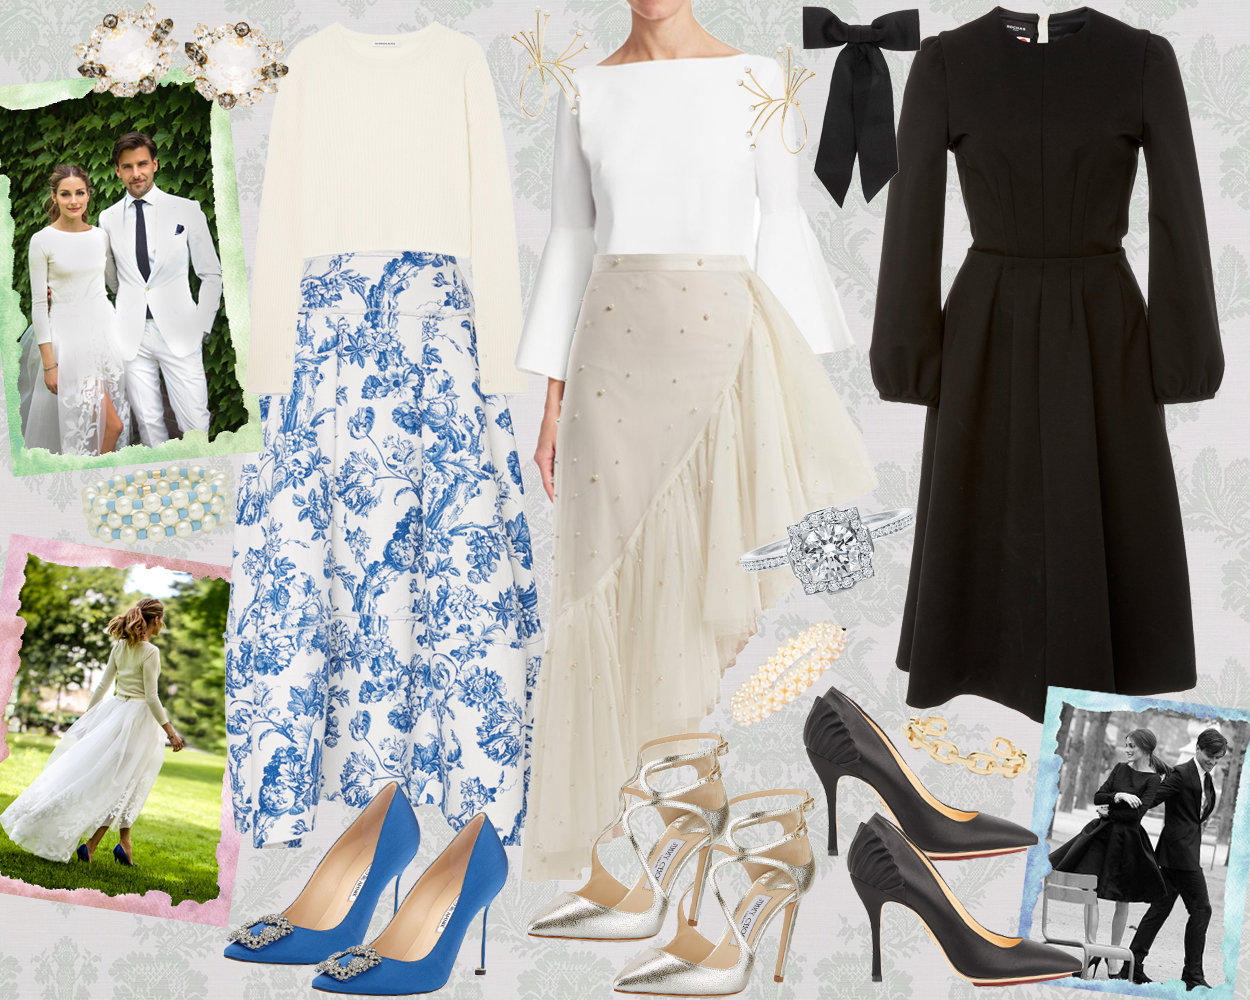 Olivia Palermo Wedding Dress: How To Get The Look